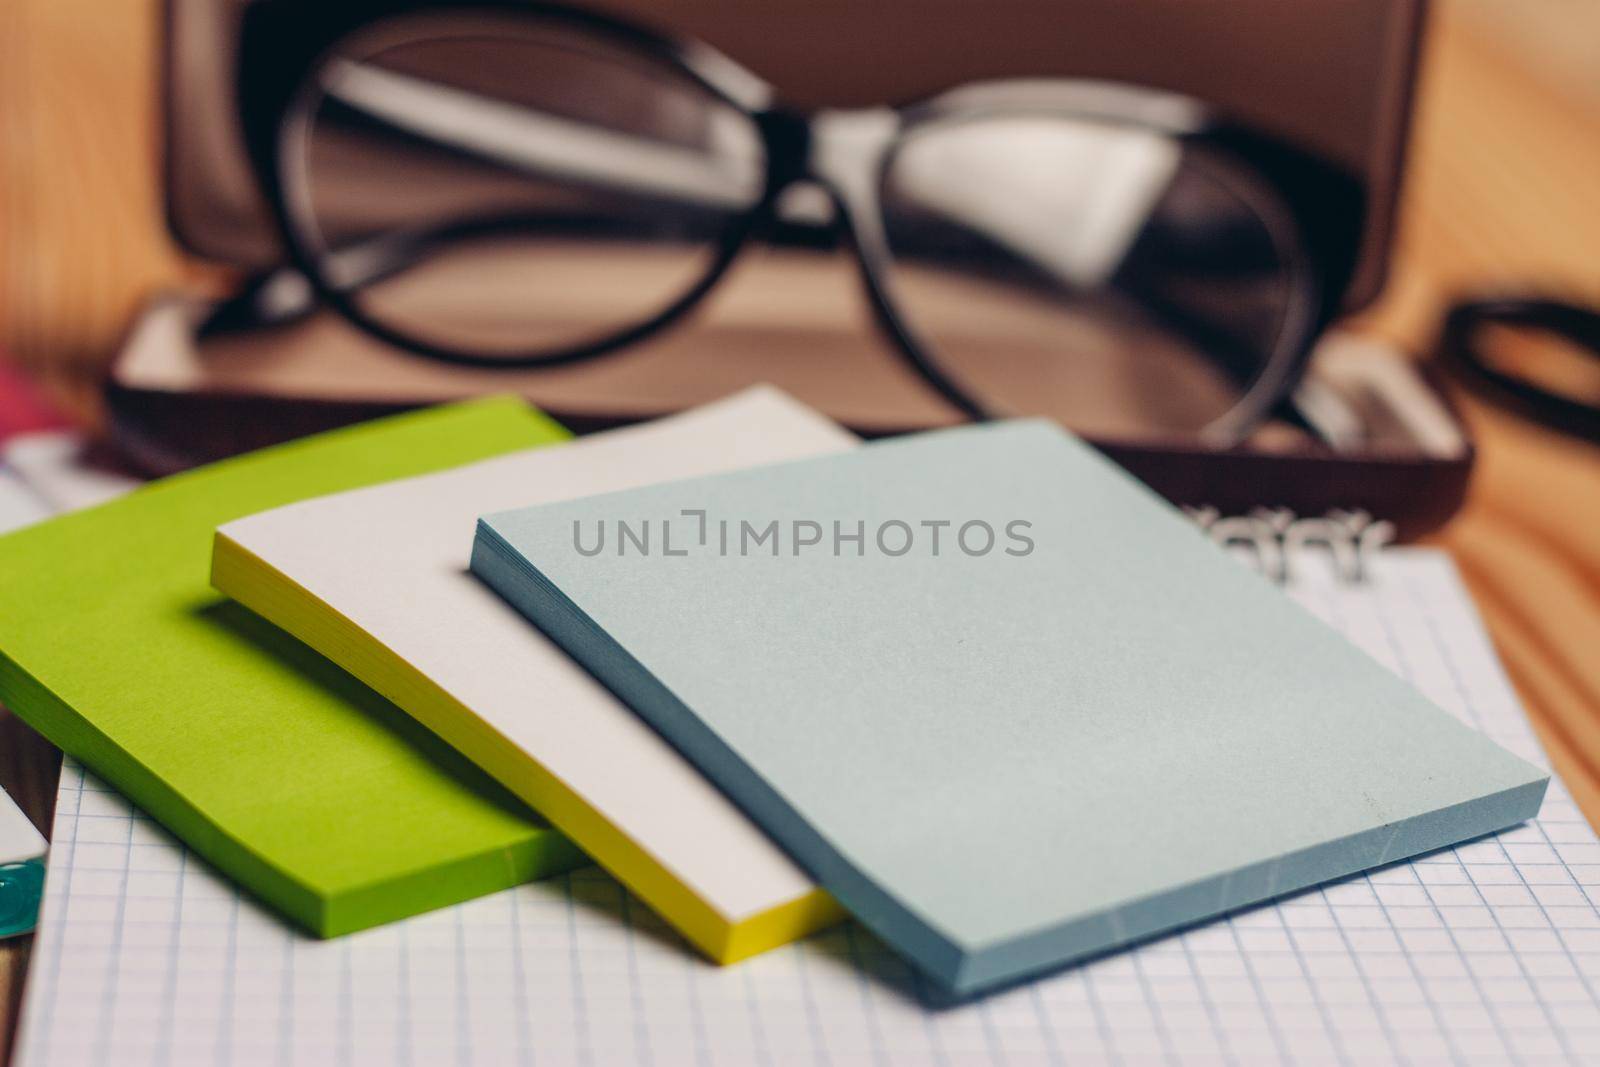 notepads felt-tip pens stationery glasses in case office. High quality photo